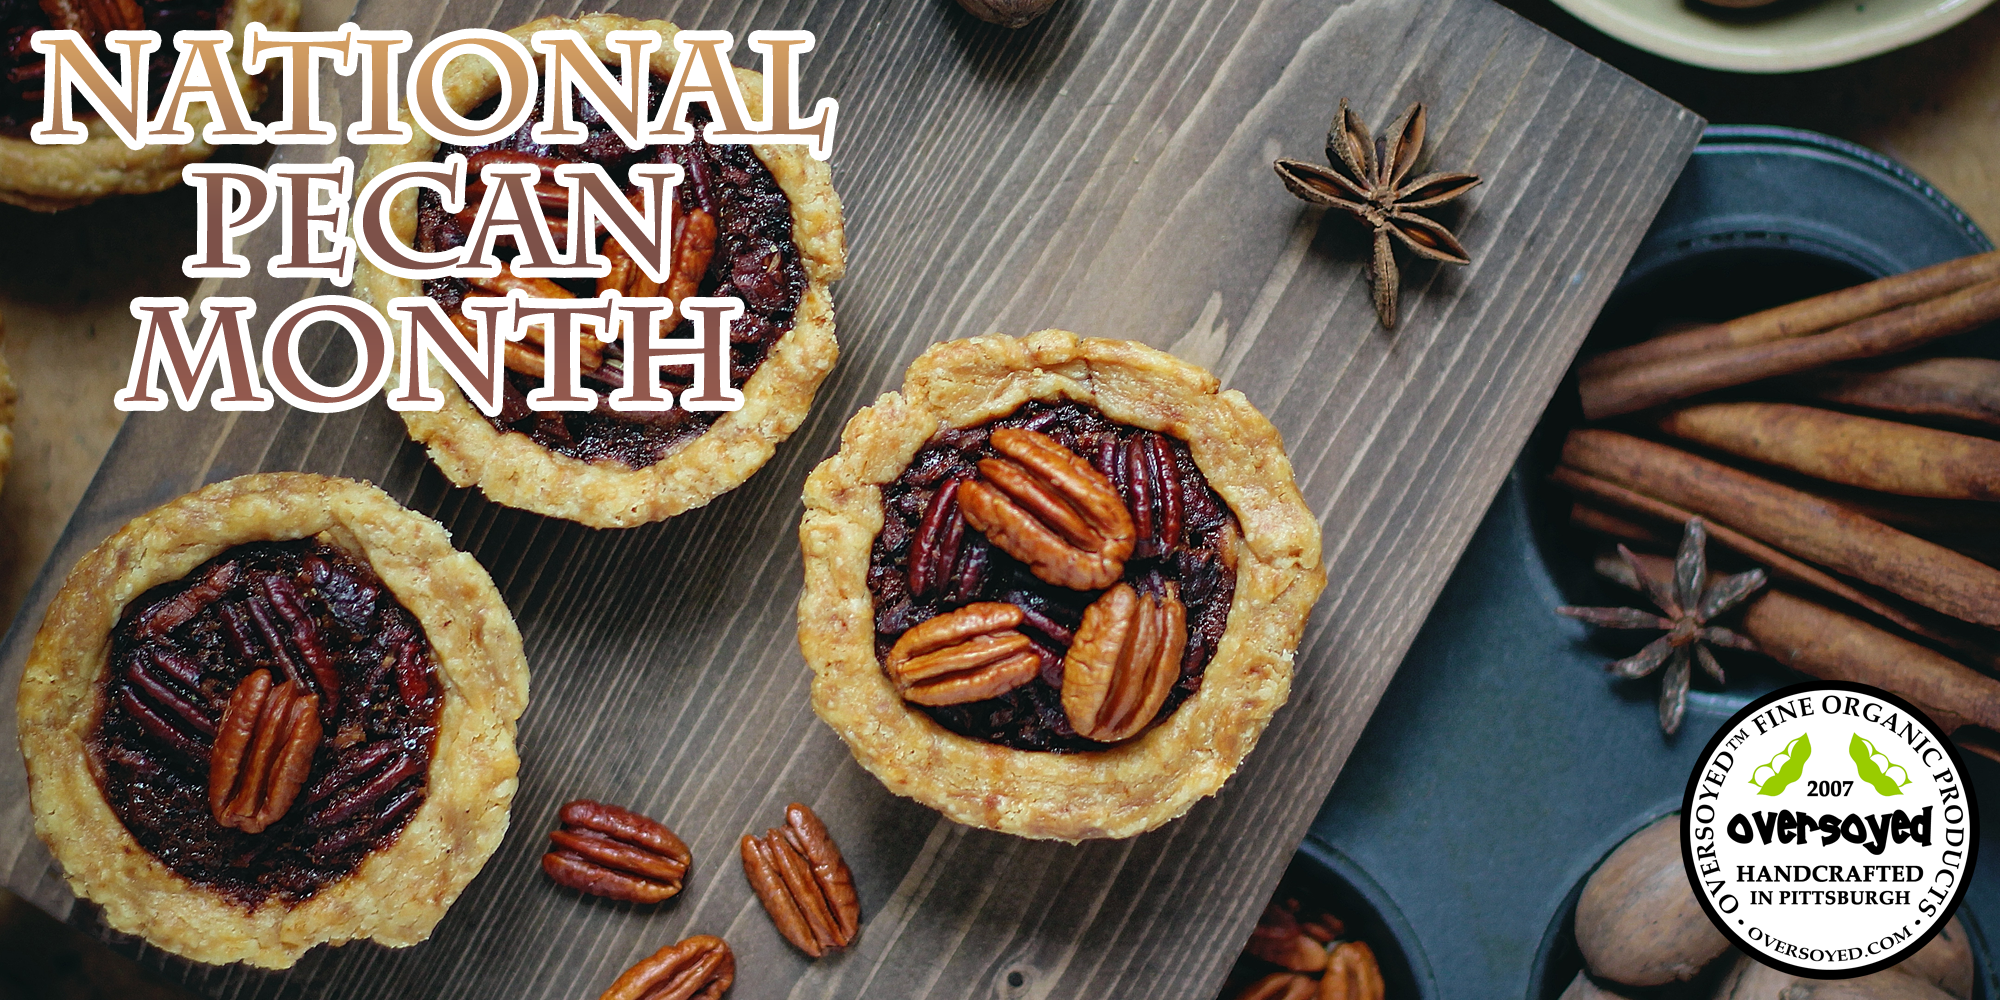 OverSoyed Fine Organic Products - National Pecan Month Collection